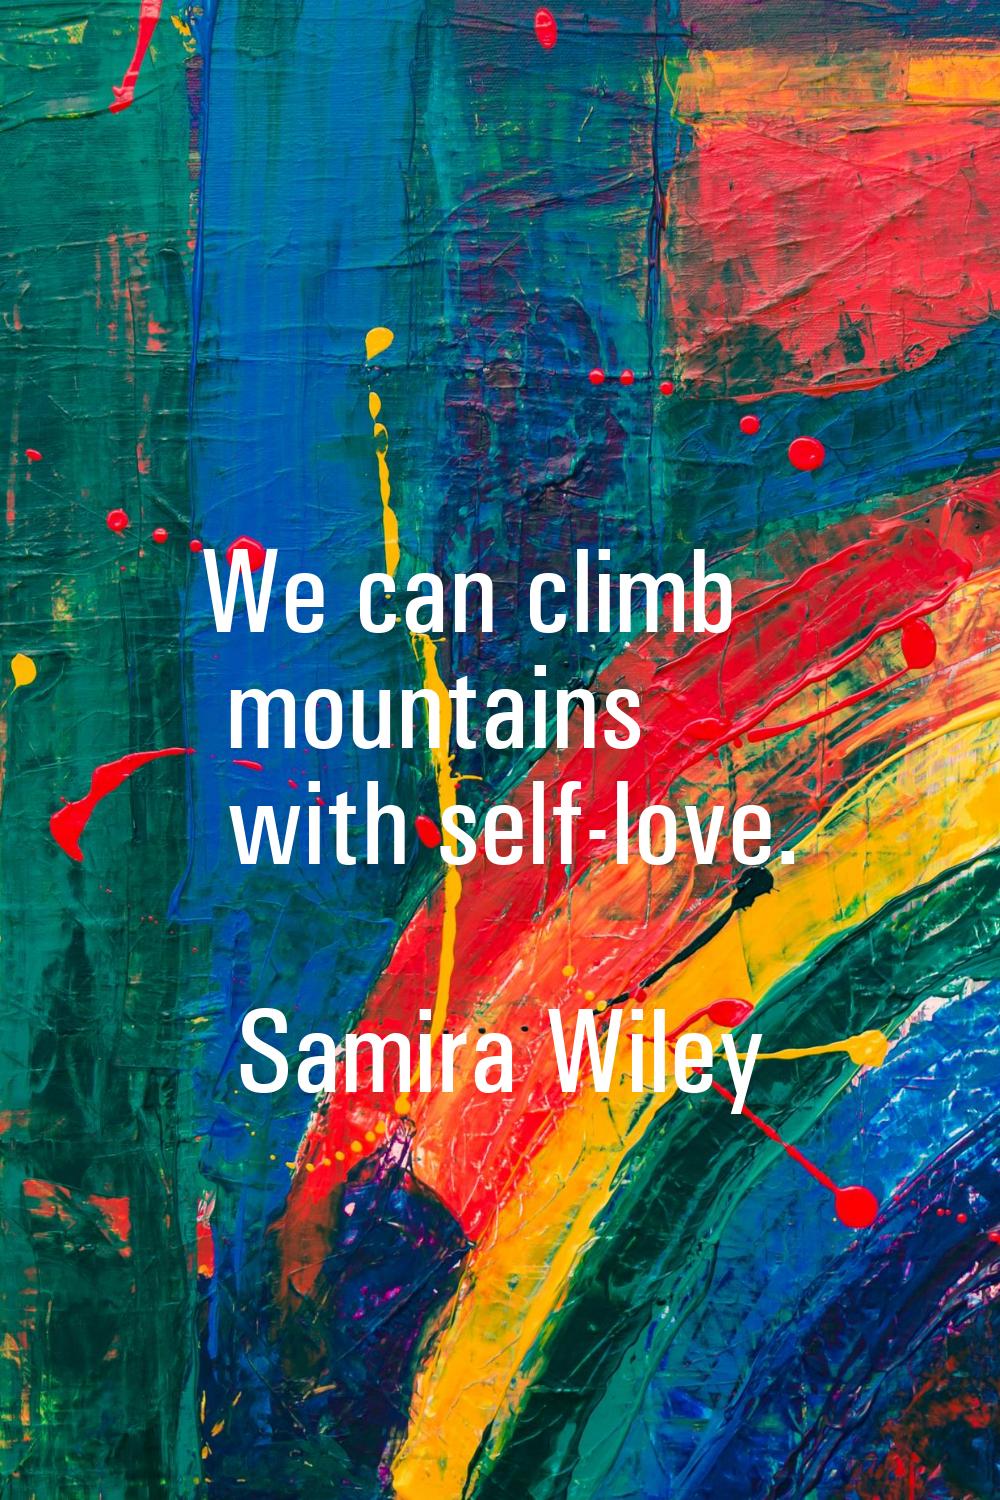 We can climb mountains with self-love.